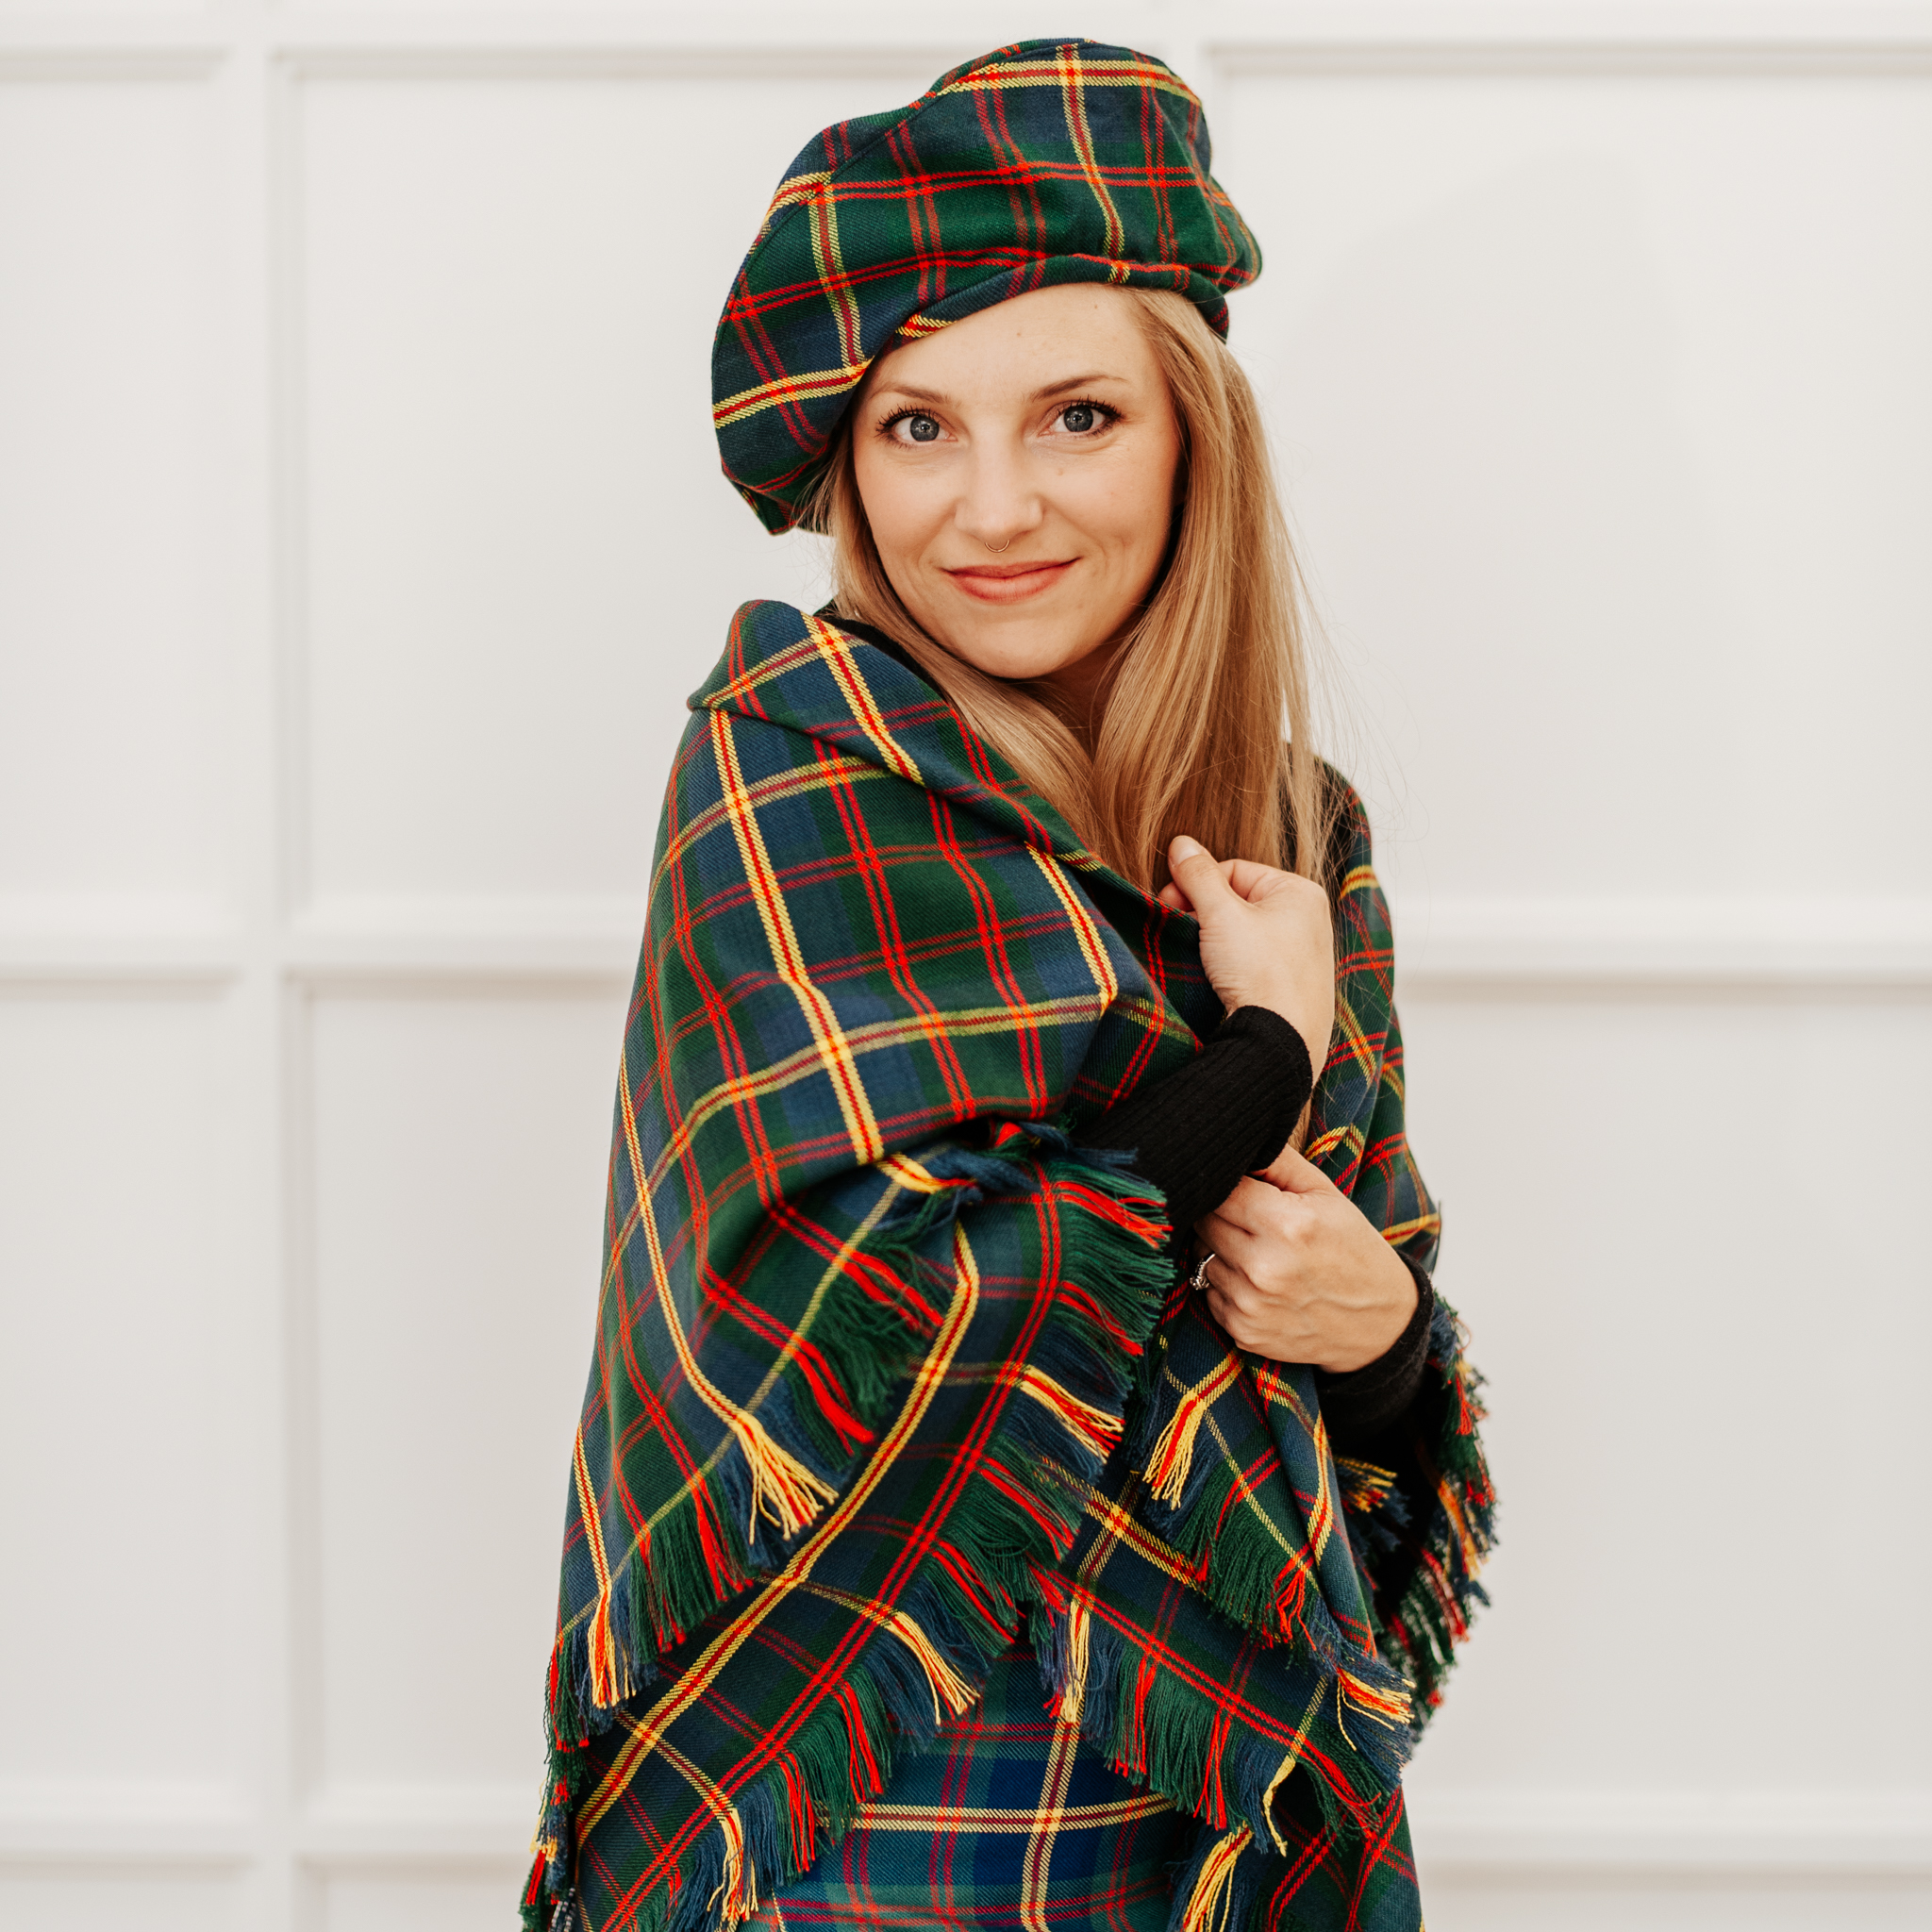 A woman wearing a Quality Wool Blend Kilt with Matching Tartan Flashes and FREE Kilt Hanger hat.